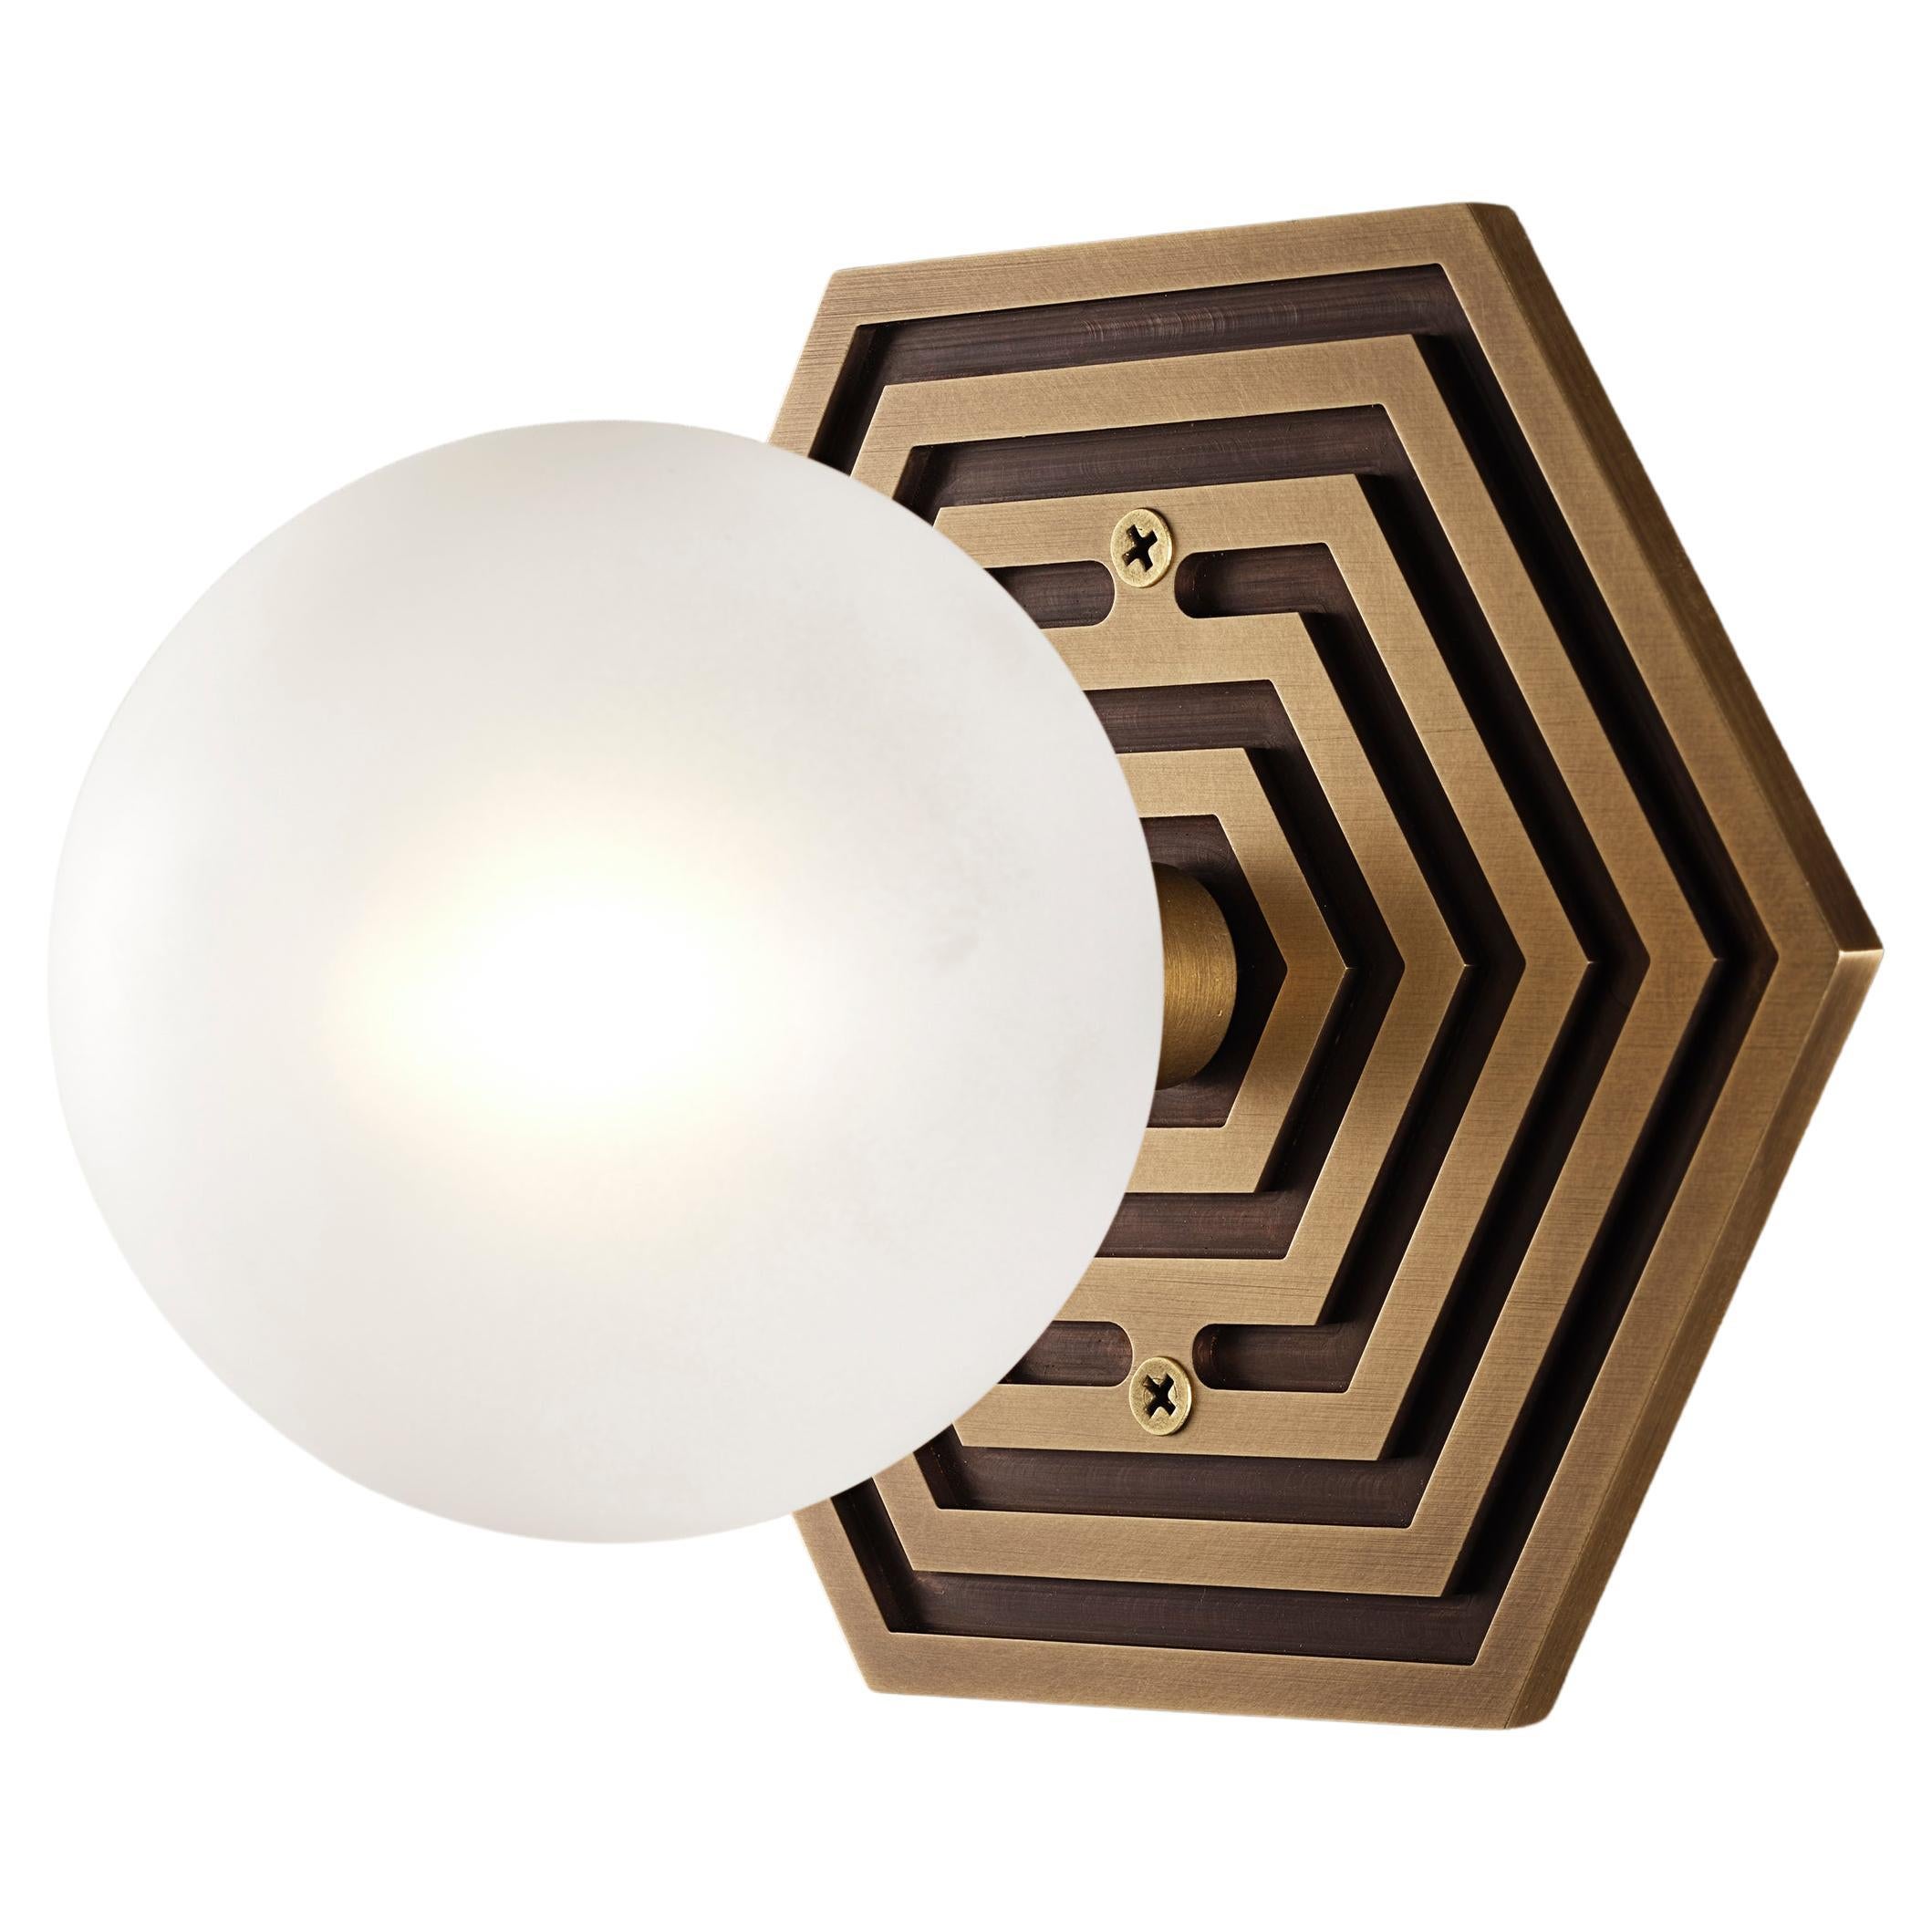 MIRA HEX wall sconce in solid brass and blown opal glass by Blueprint Lighting, 2022.
A handsome study in clean lines and simple form inspired by the both the Machine Age and Art Deco periods, the Mira Hex is truly a go-anywhere design. With its